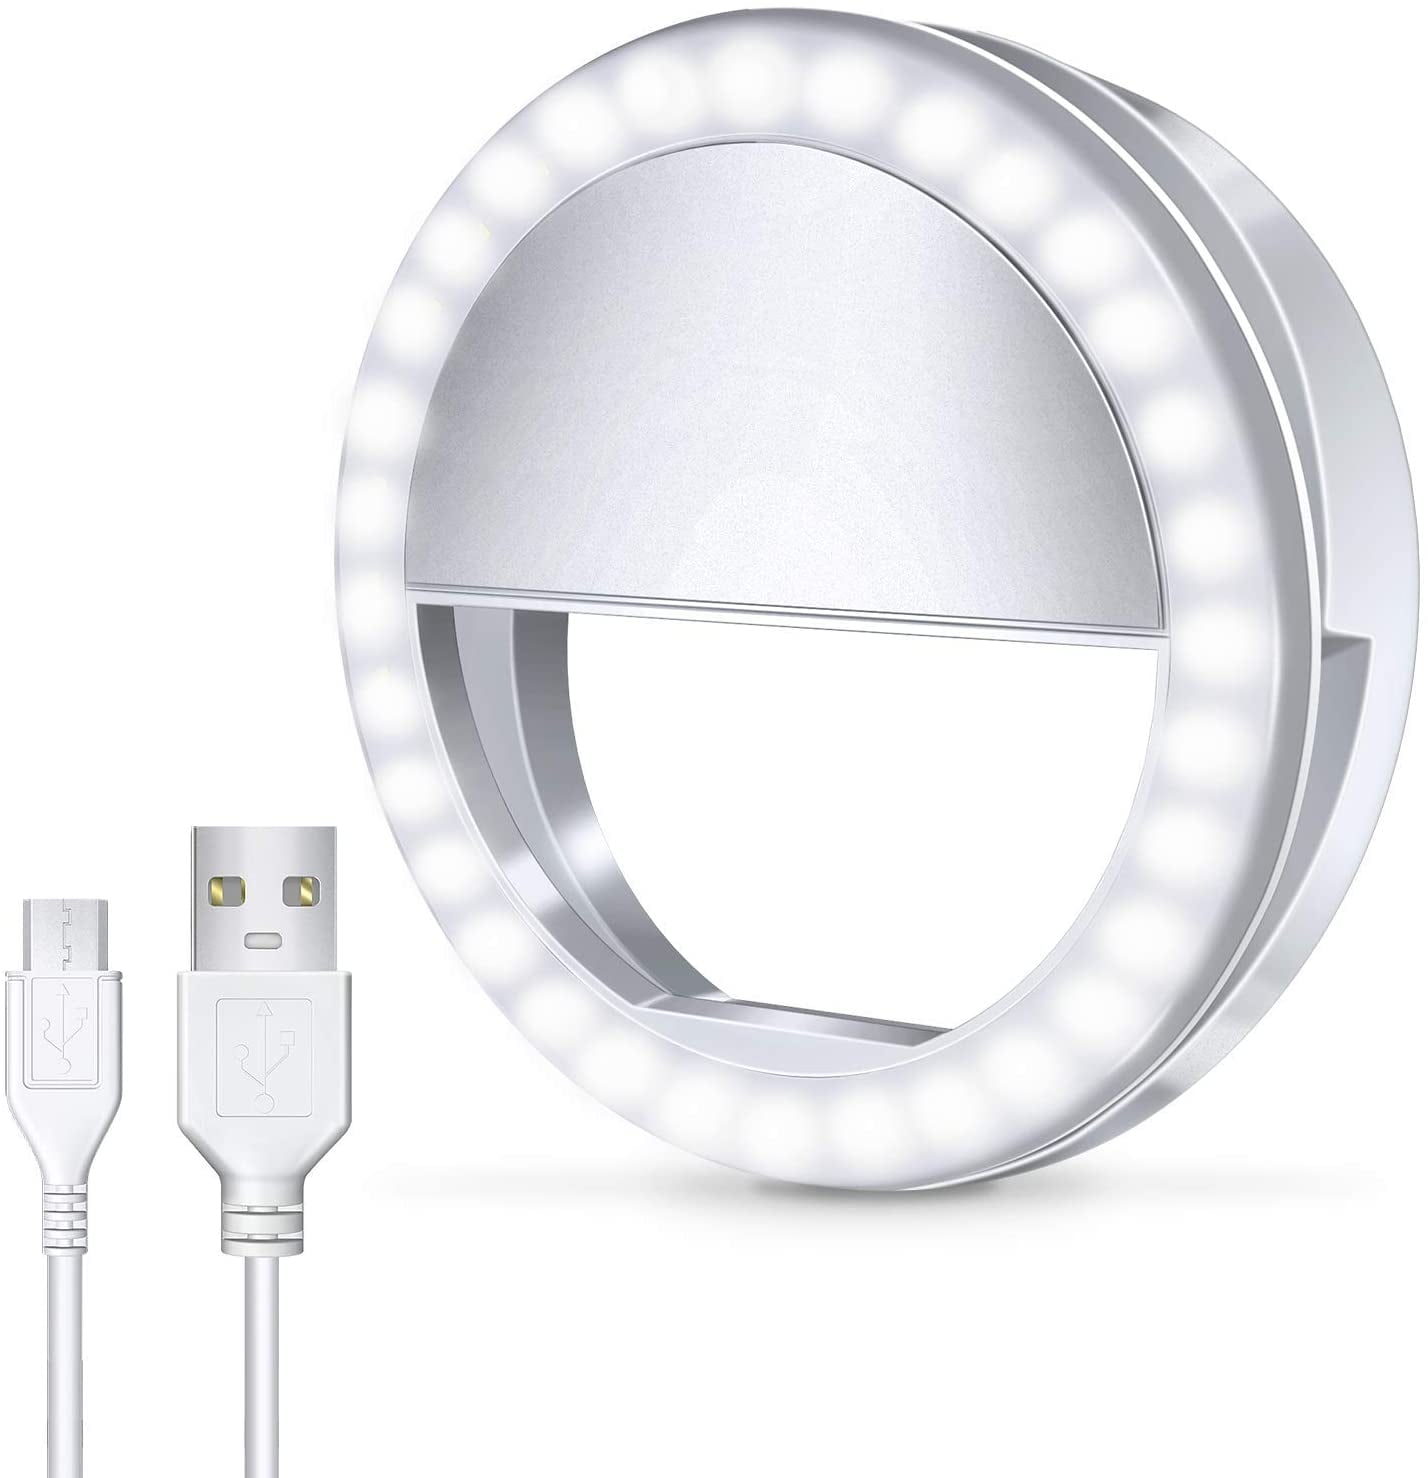 Mini Selfie Ring Light Rechargeable Selfie LED Camera Light with 3 Levels of Brightness Makeup Light Ring